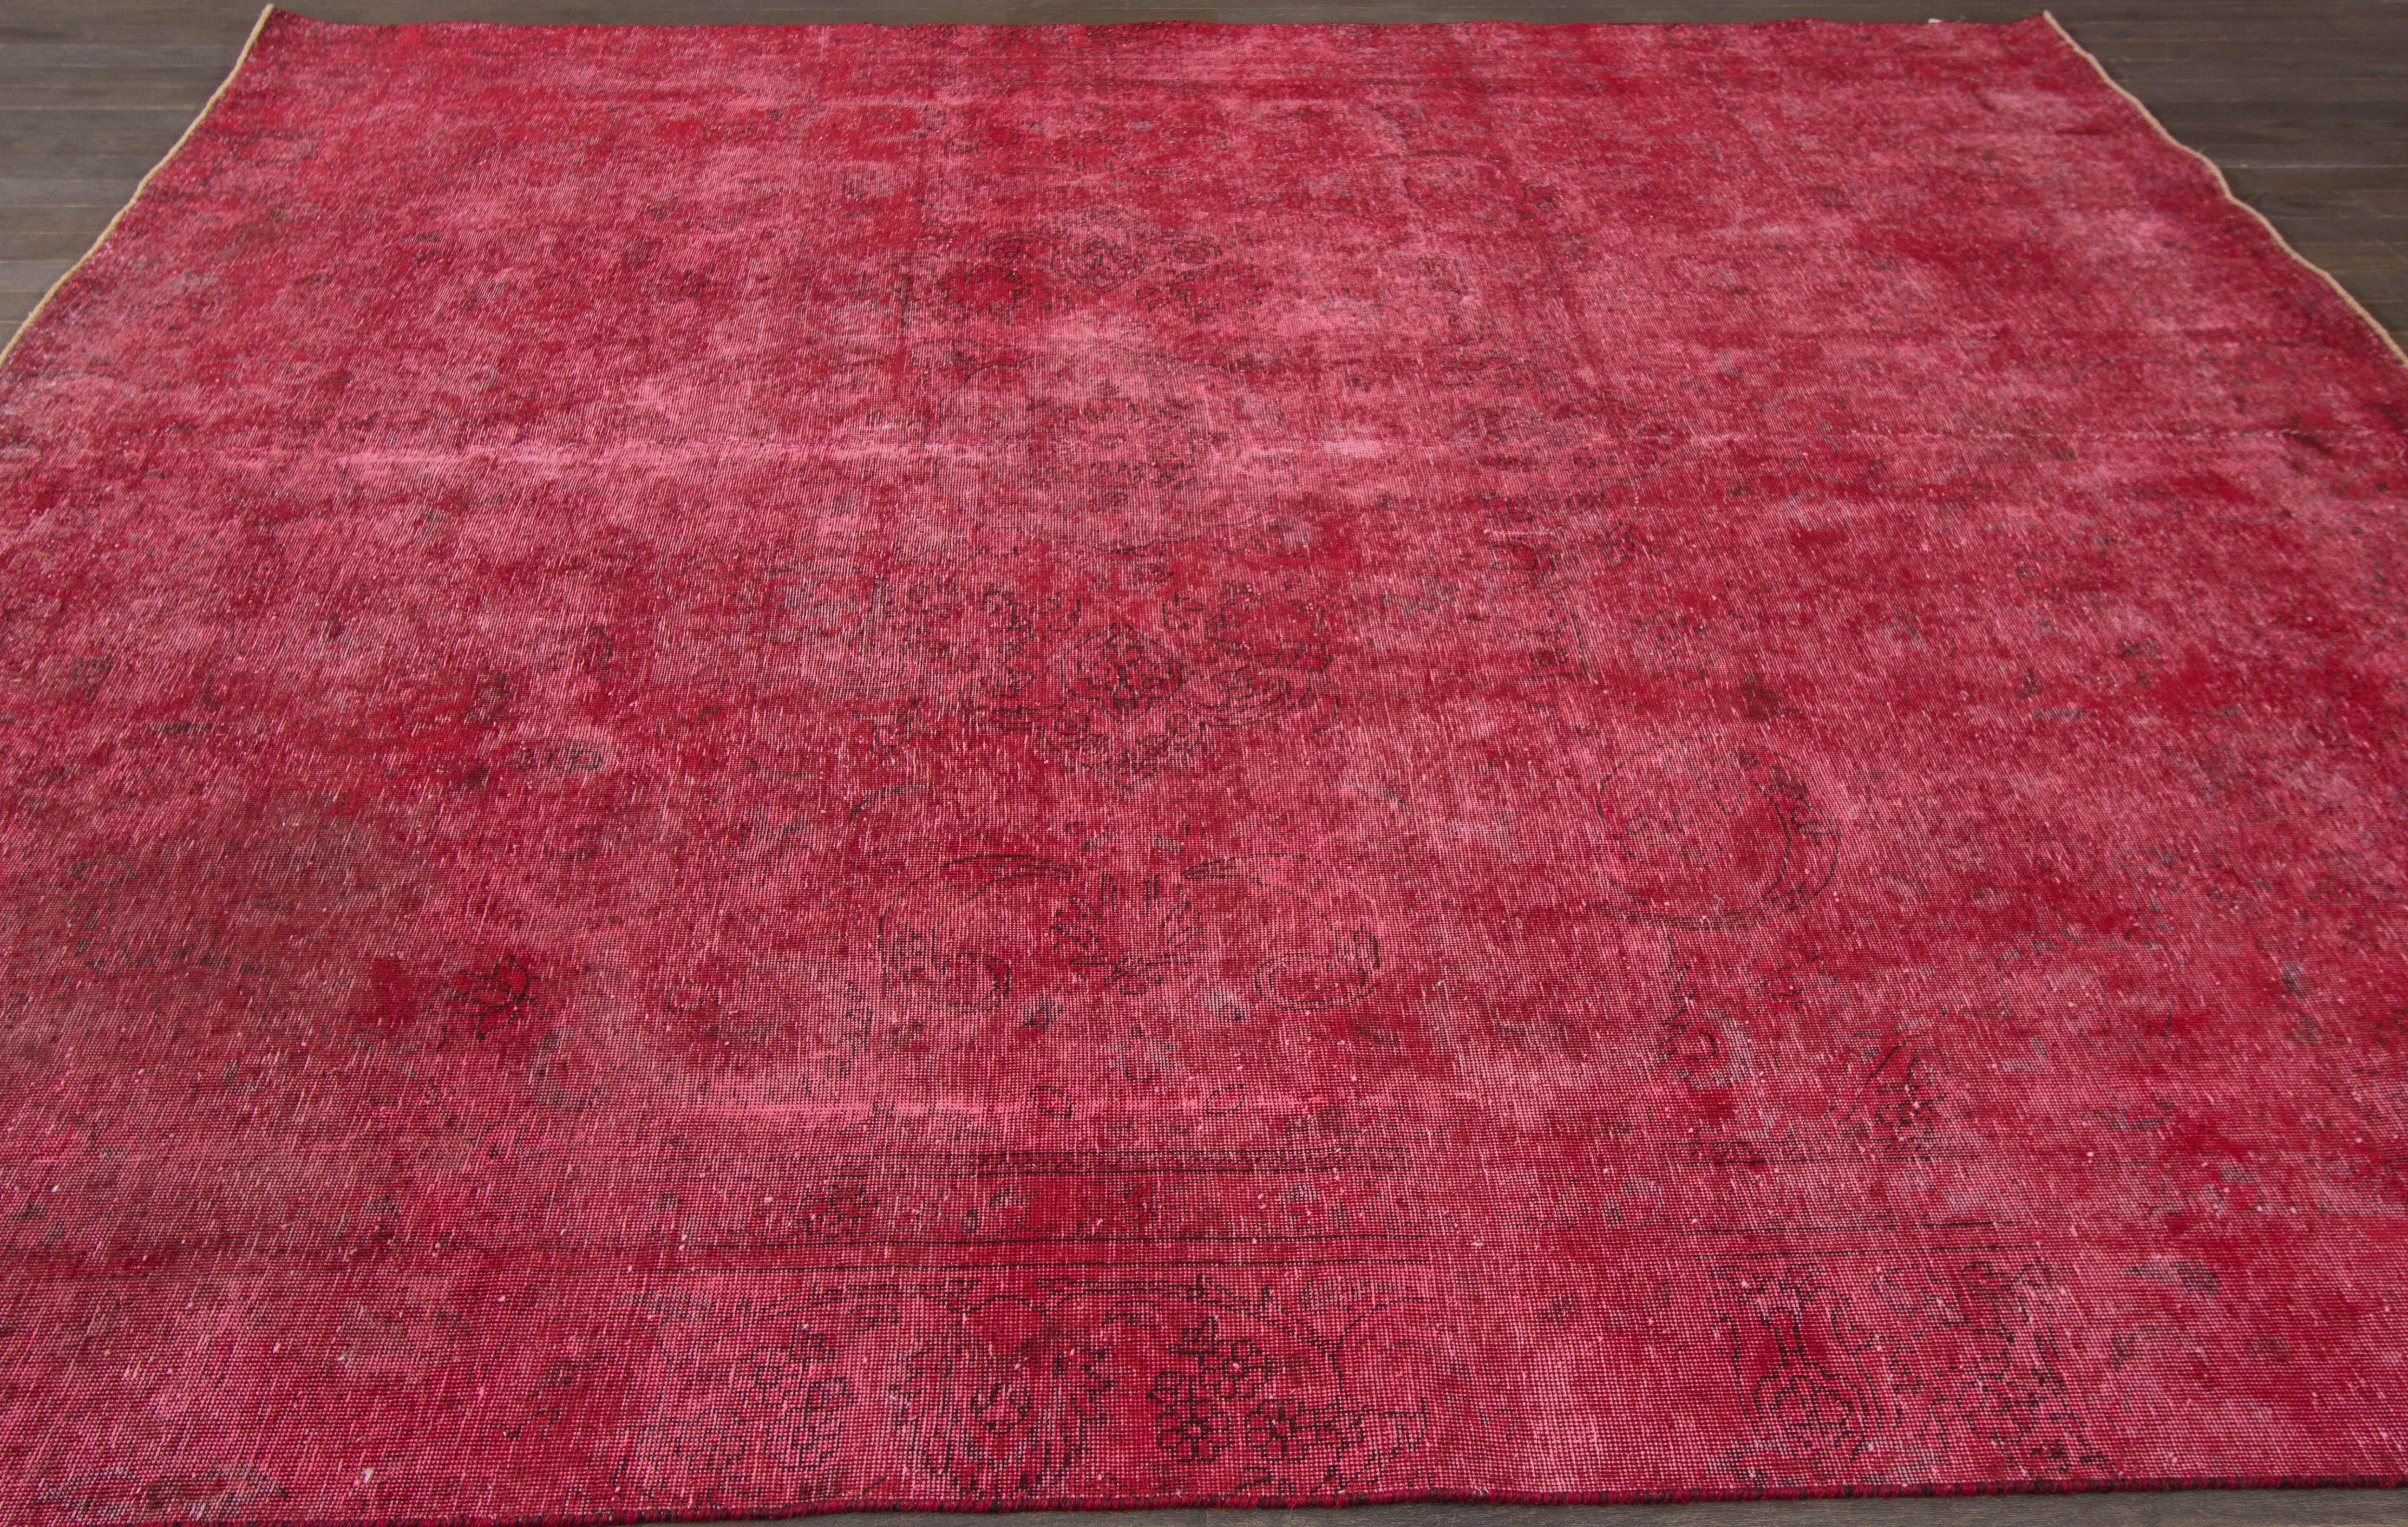 A hand-knotted square Overdyed rug with an all-over design on a red field. Accents of ivory and pink throughout the piece. This rug measures 8'.6 x 9'.7.